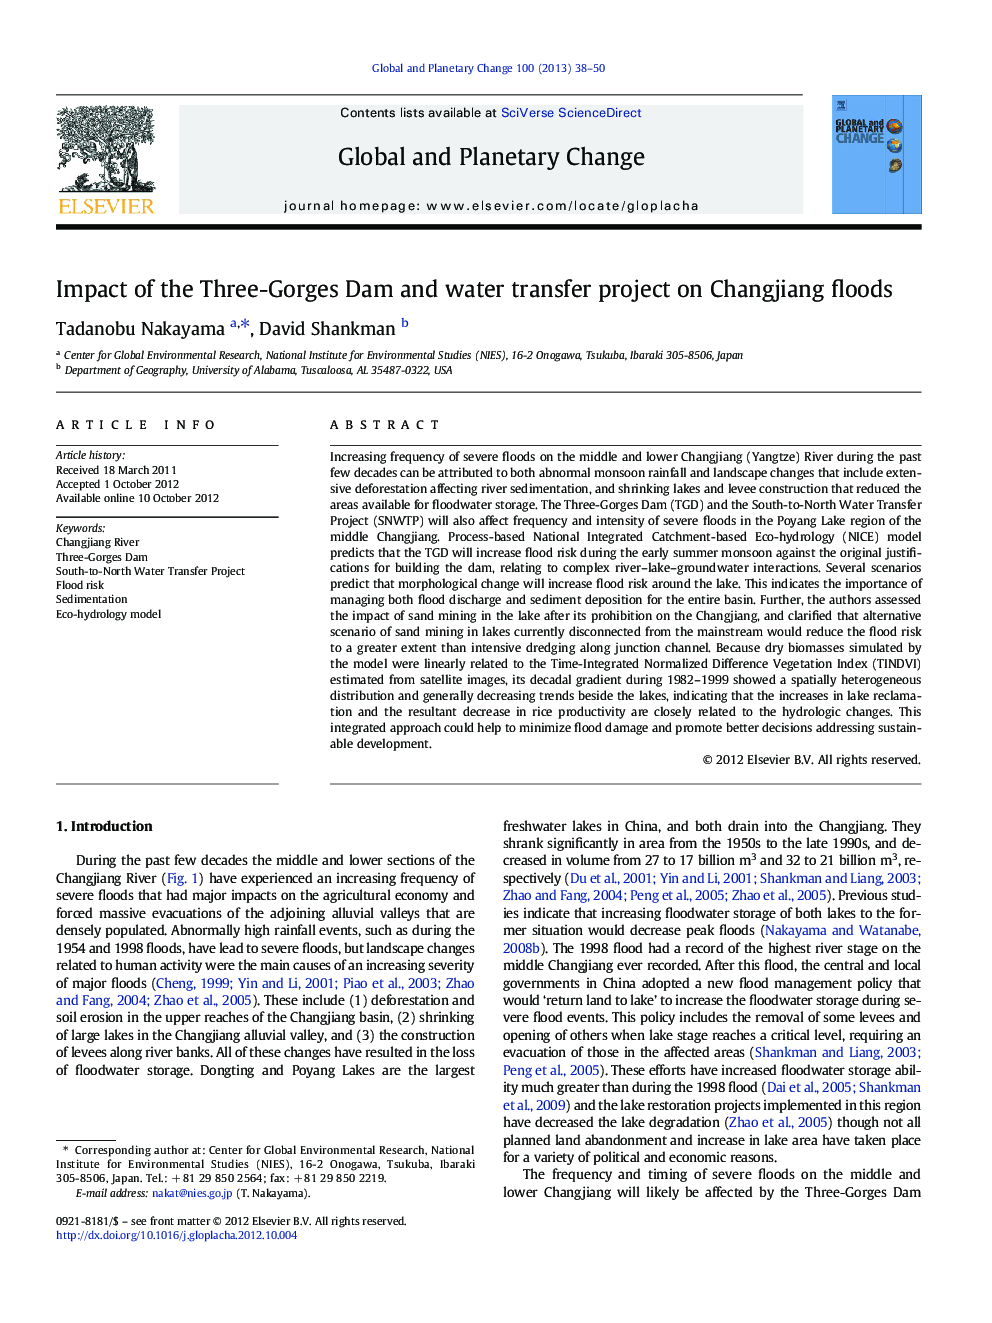 Impact of the Three-Gorges Dam and water transfer project on Changjiang floods